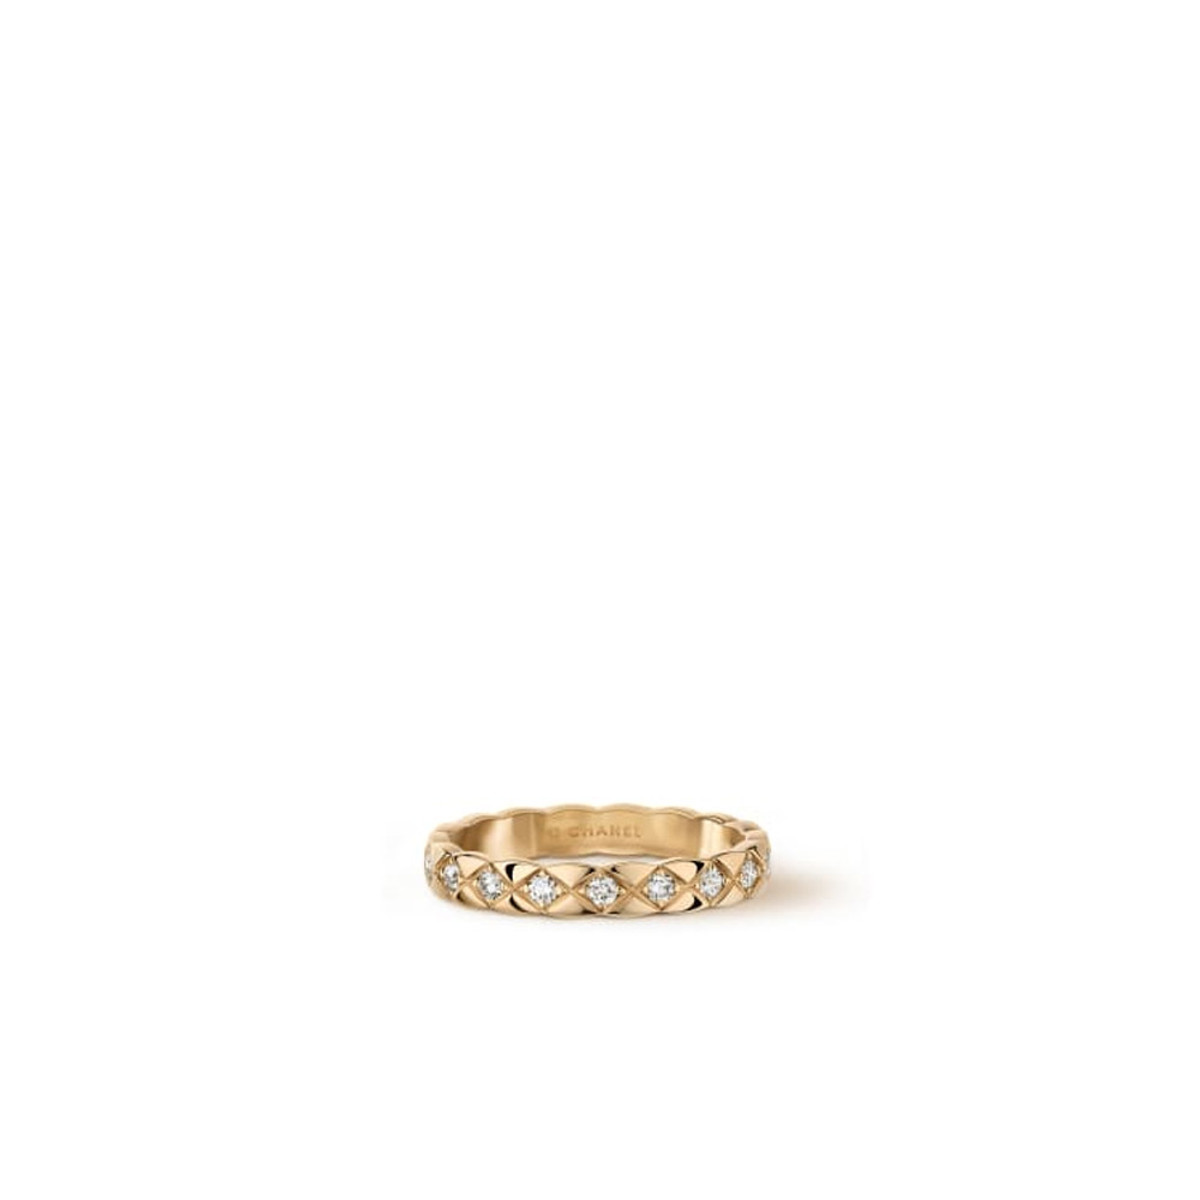 CHANEL COCO CRUSH RING-22513 Product Image